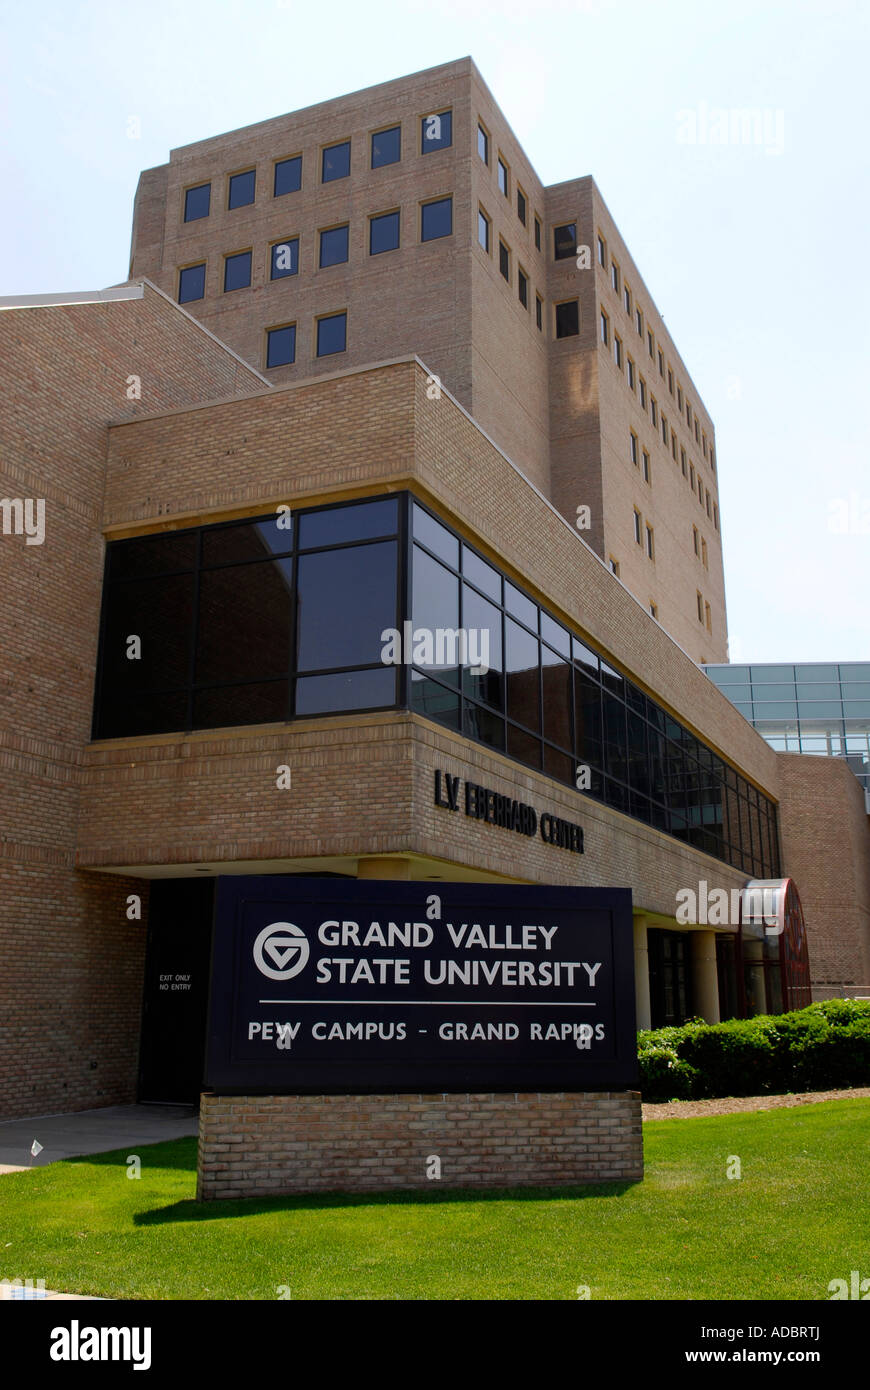 Grand Valley State University - Grand Haven